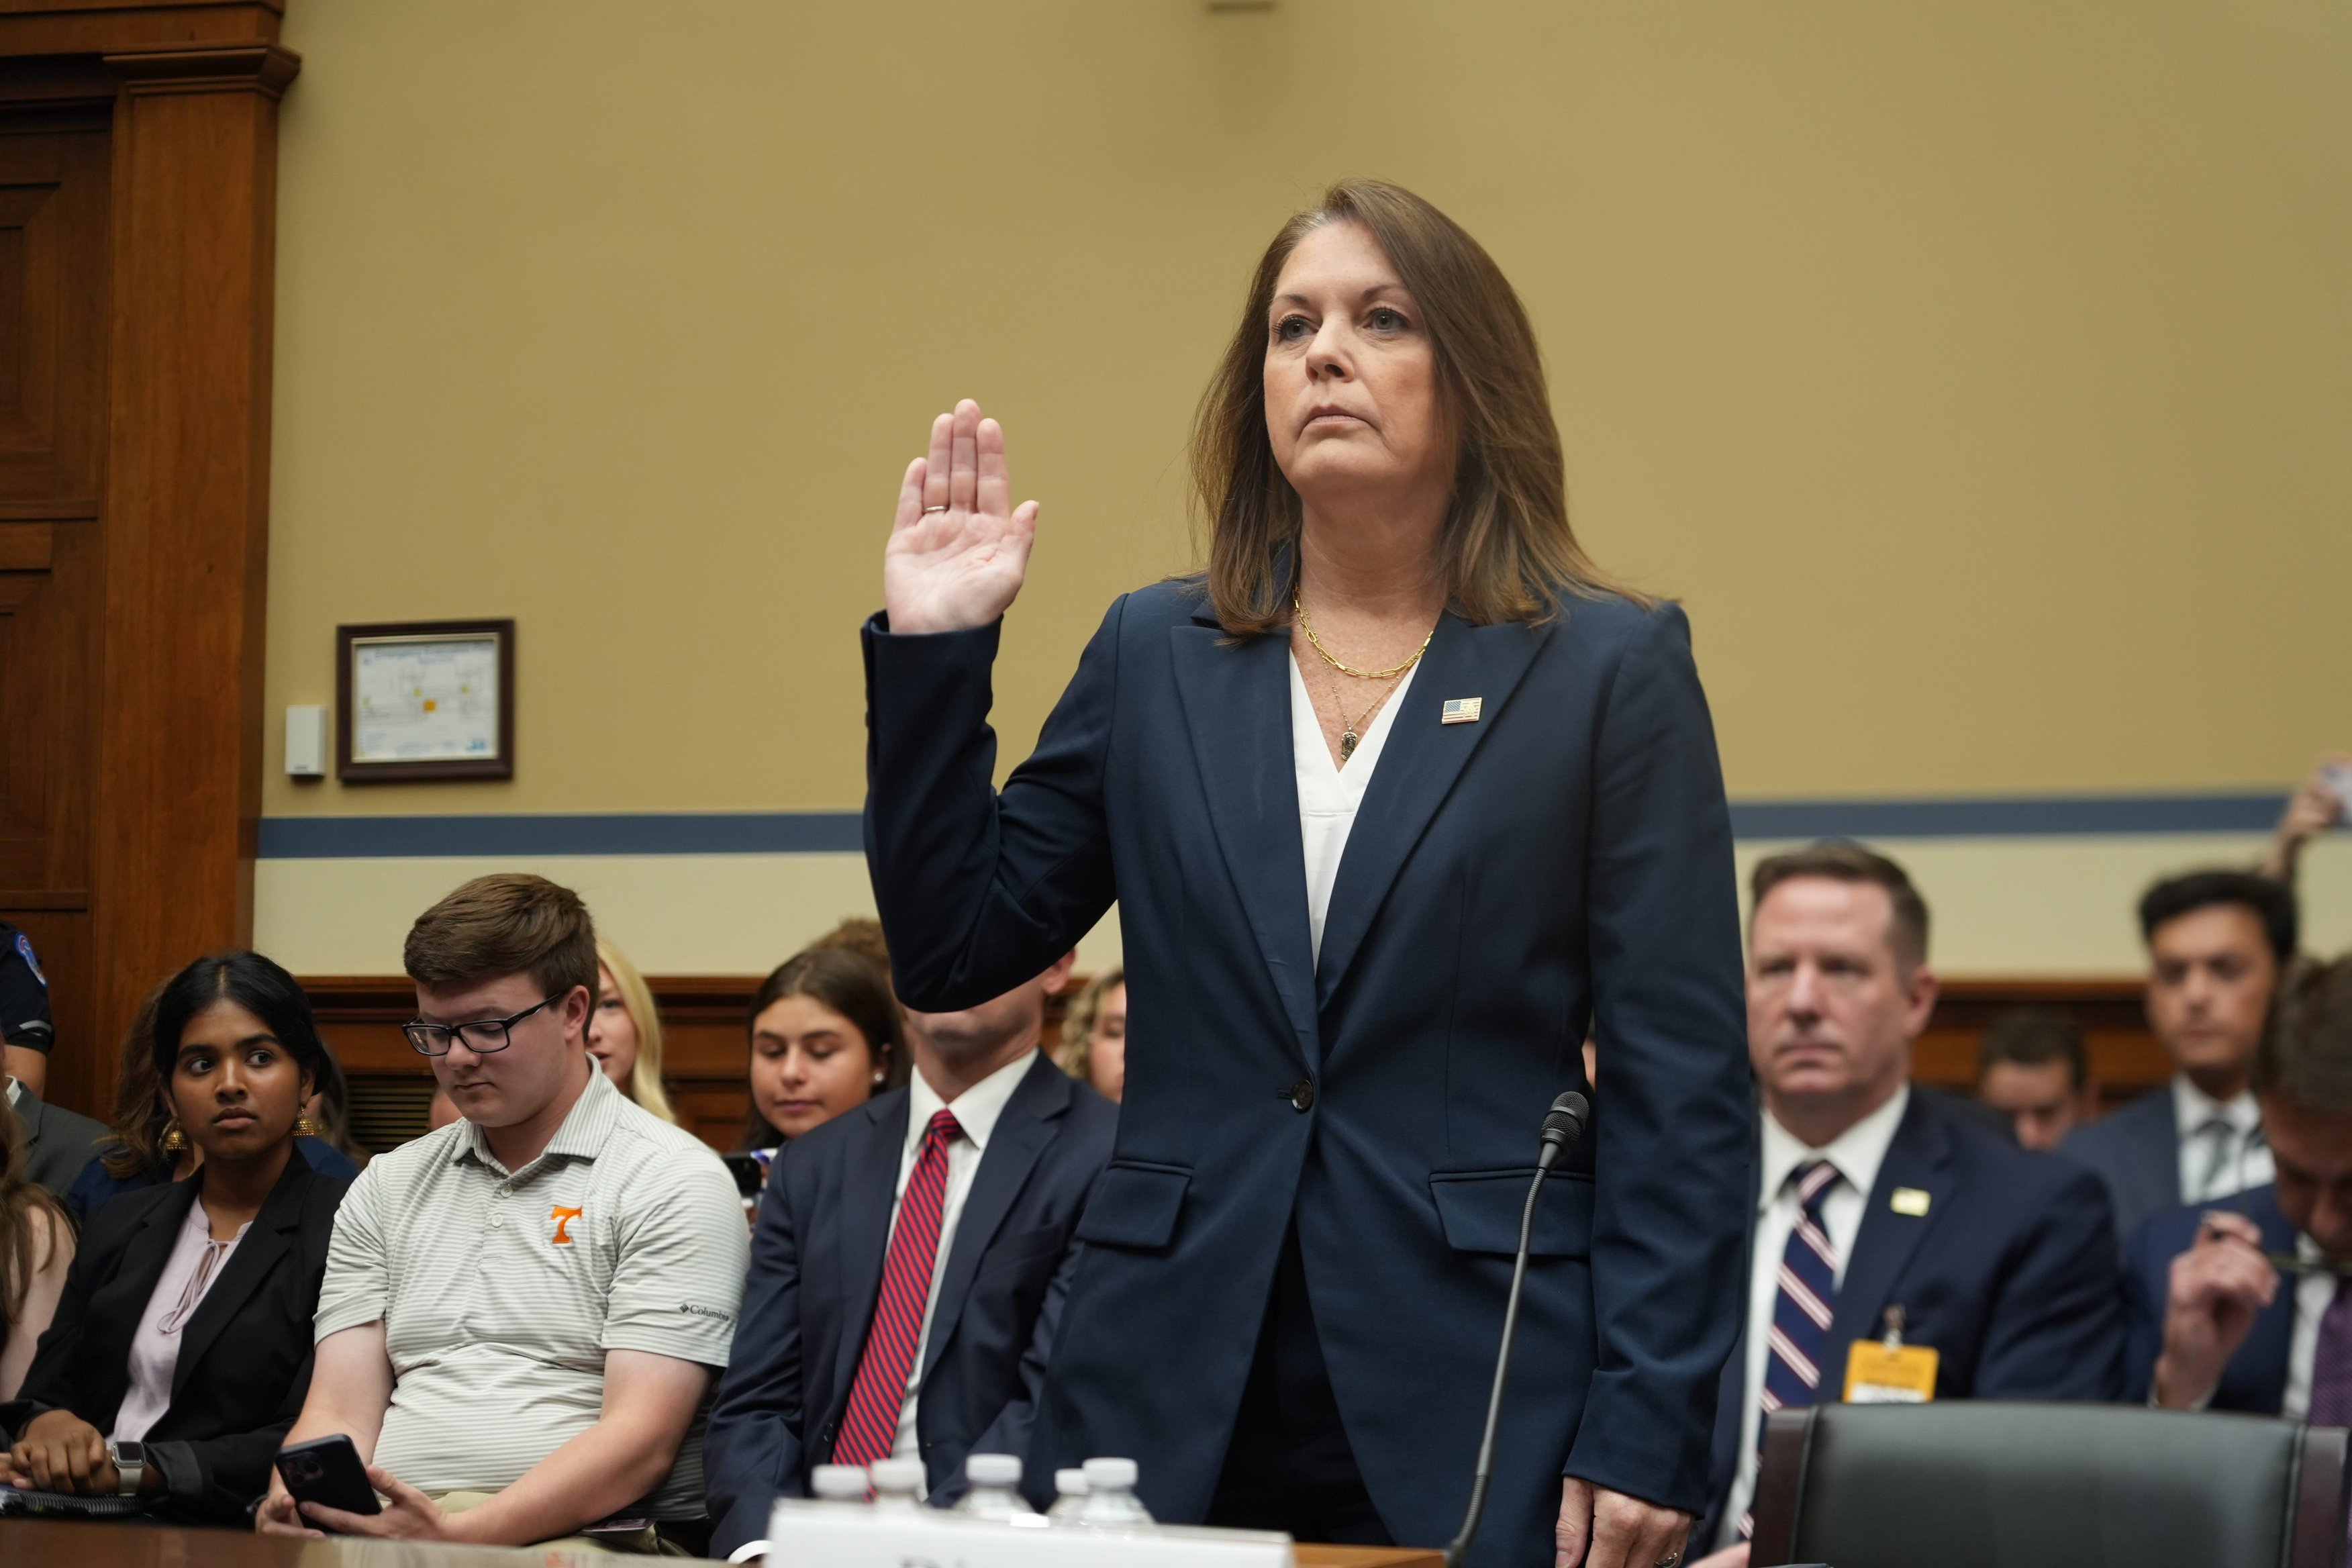 Kimberly Cheatle Steps Down from Secret Service